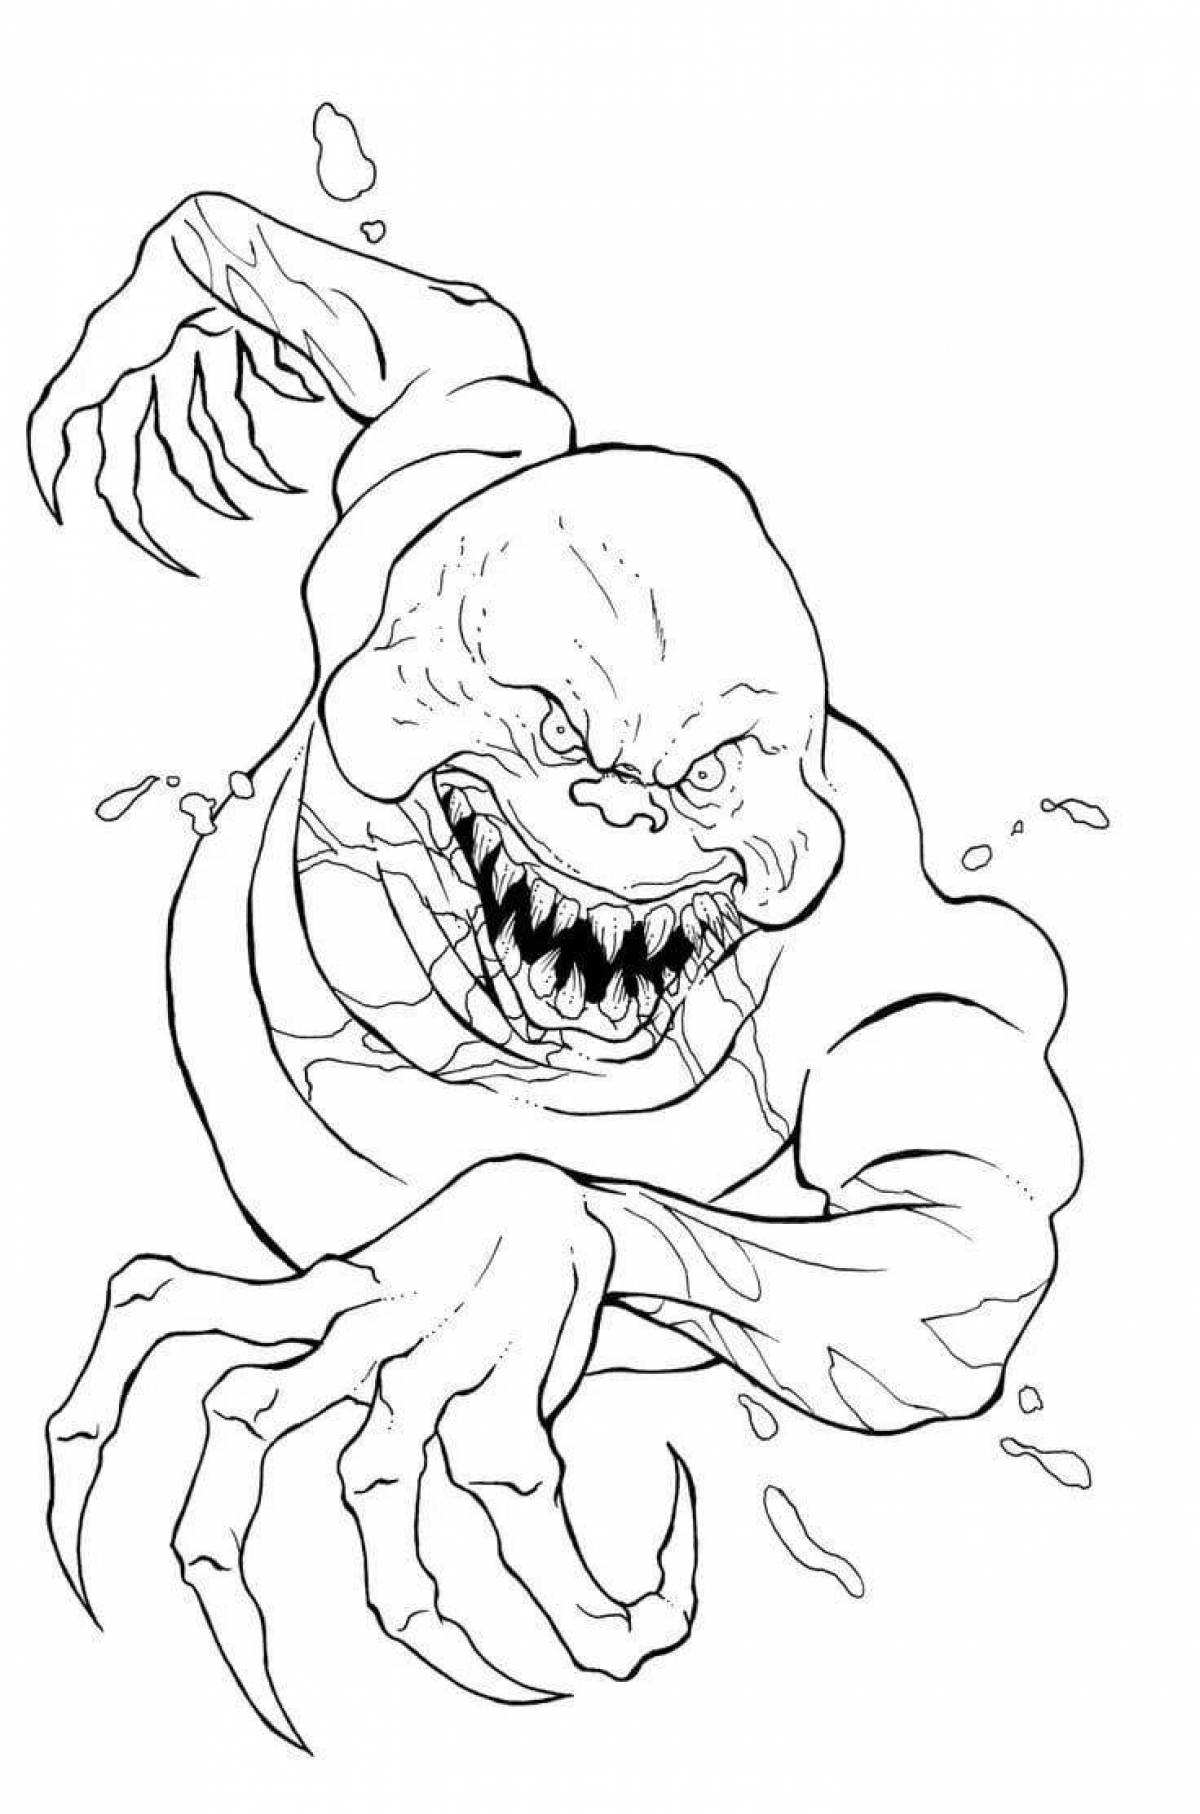 Creepy scary baby coloring book